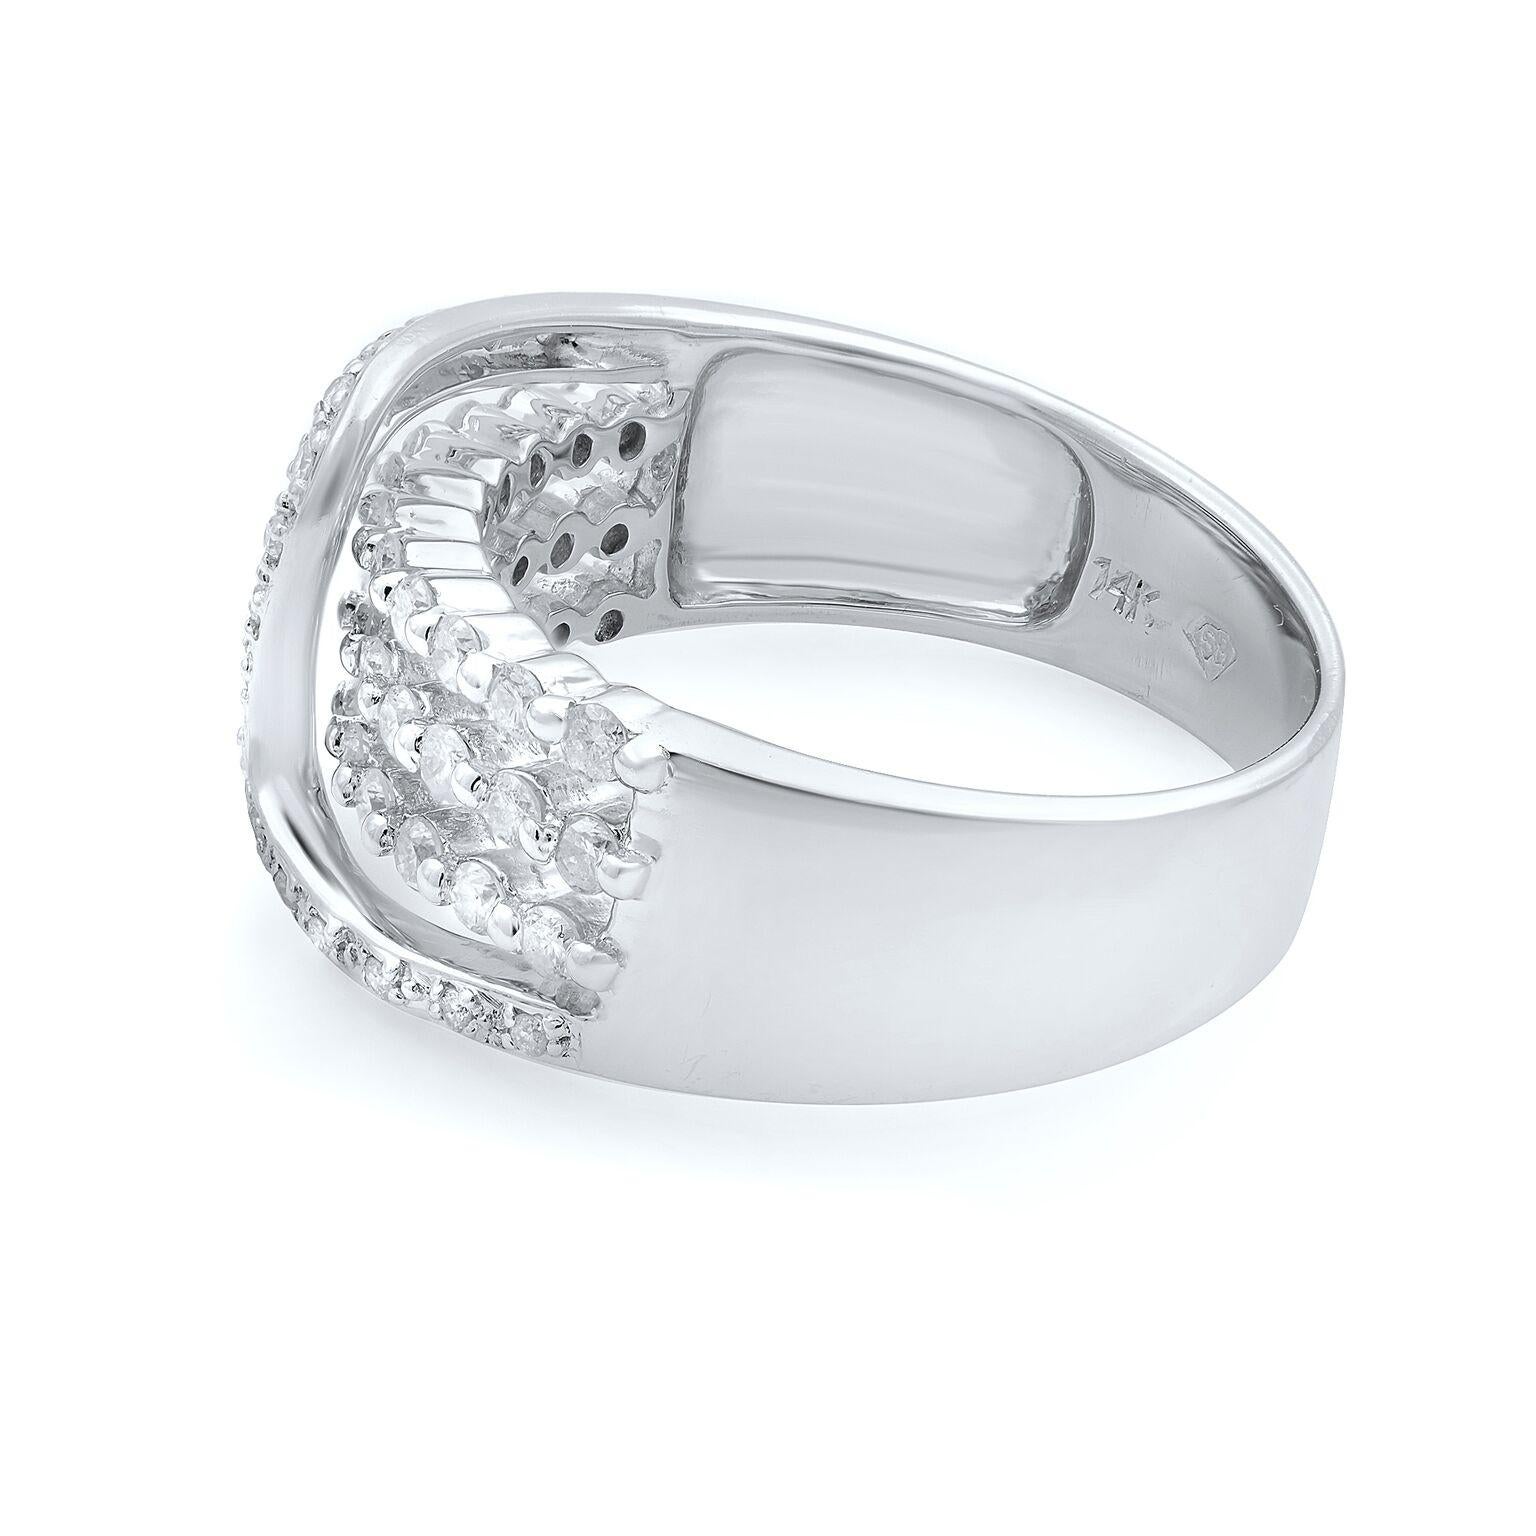 Beautifully made 14k white gold ladies diamond unique cocktail ring comes with multiple excellent cut round diamonds set in micro-prong setting. Diamonds are approximately SI1 clarity and J color. Ring Size 7.5. Comes with a presentable gift box.